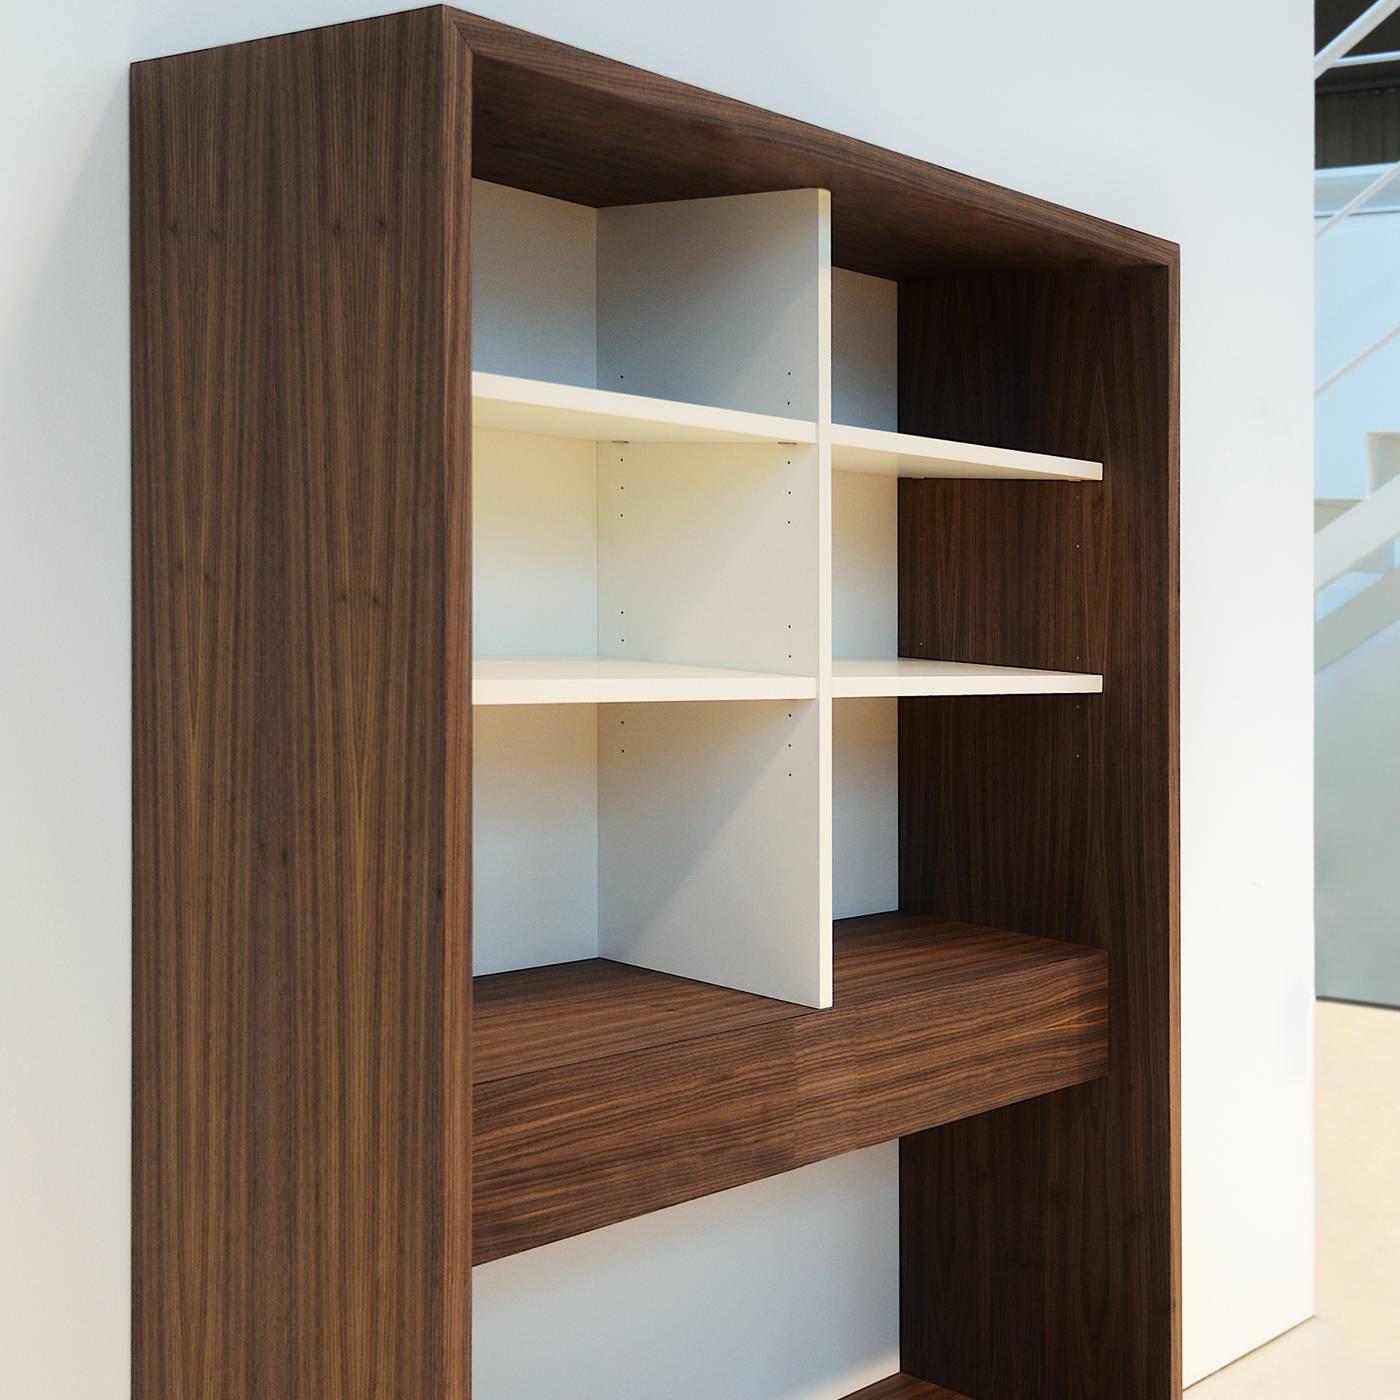 This remarkable bookcase blends natural materials, refined finishes, and impeccable details for a result that is elegant and versatile. Entirely handmade with canaletto walnut veneer, except for the back and the inner top shelves lacquered in white